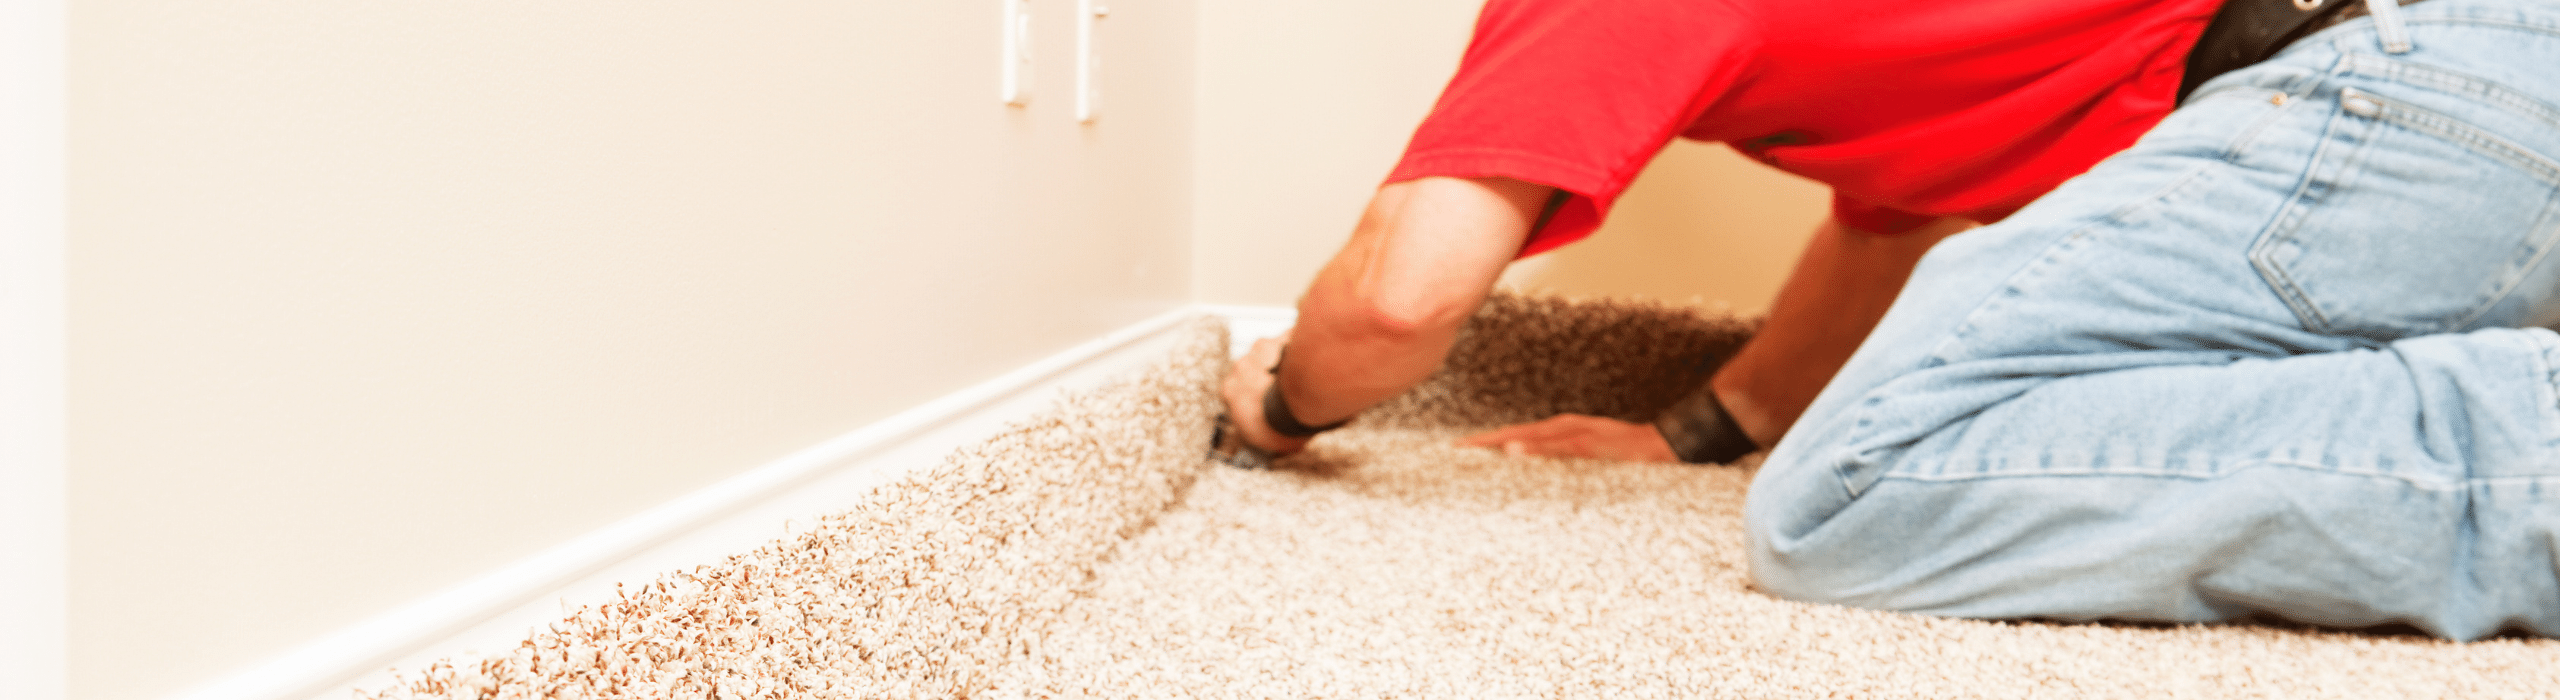 Professional carpet installation being done in home with beige carpet